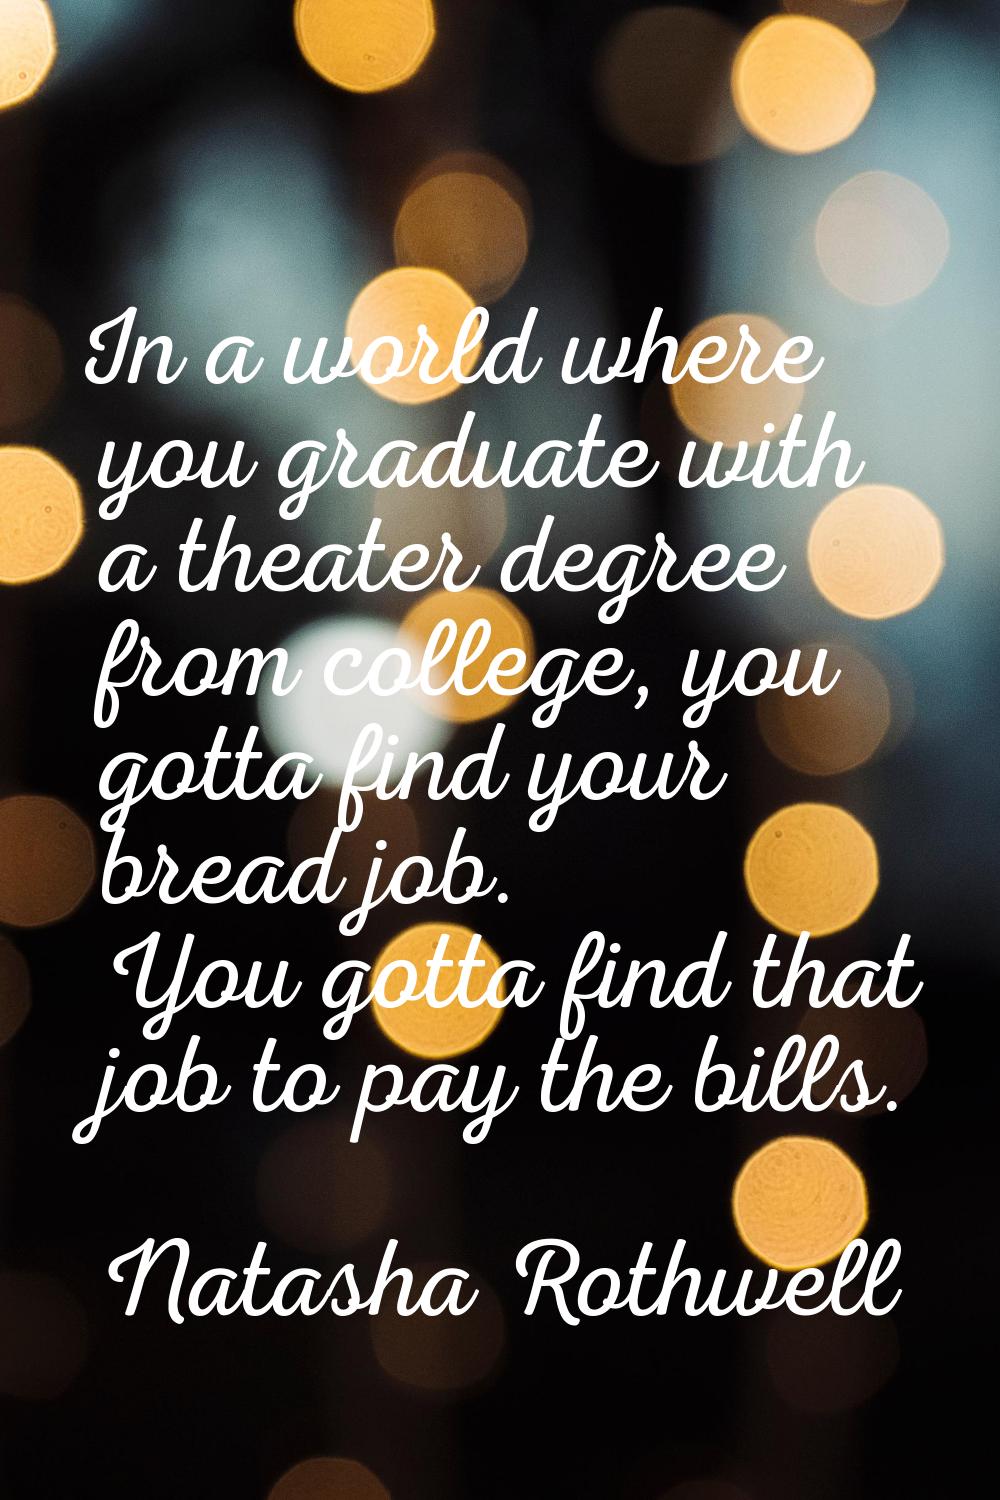 In a world where you graduate with a theater degree from college, you gotta find your bread job. Yo